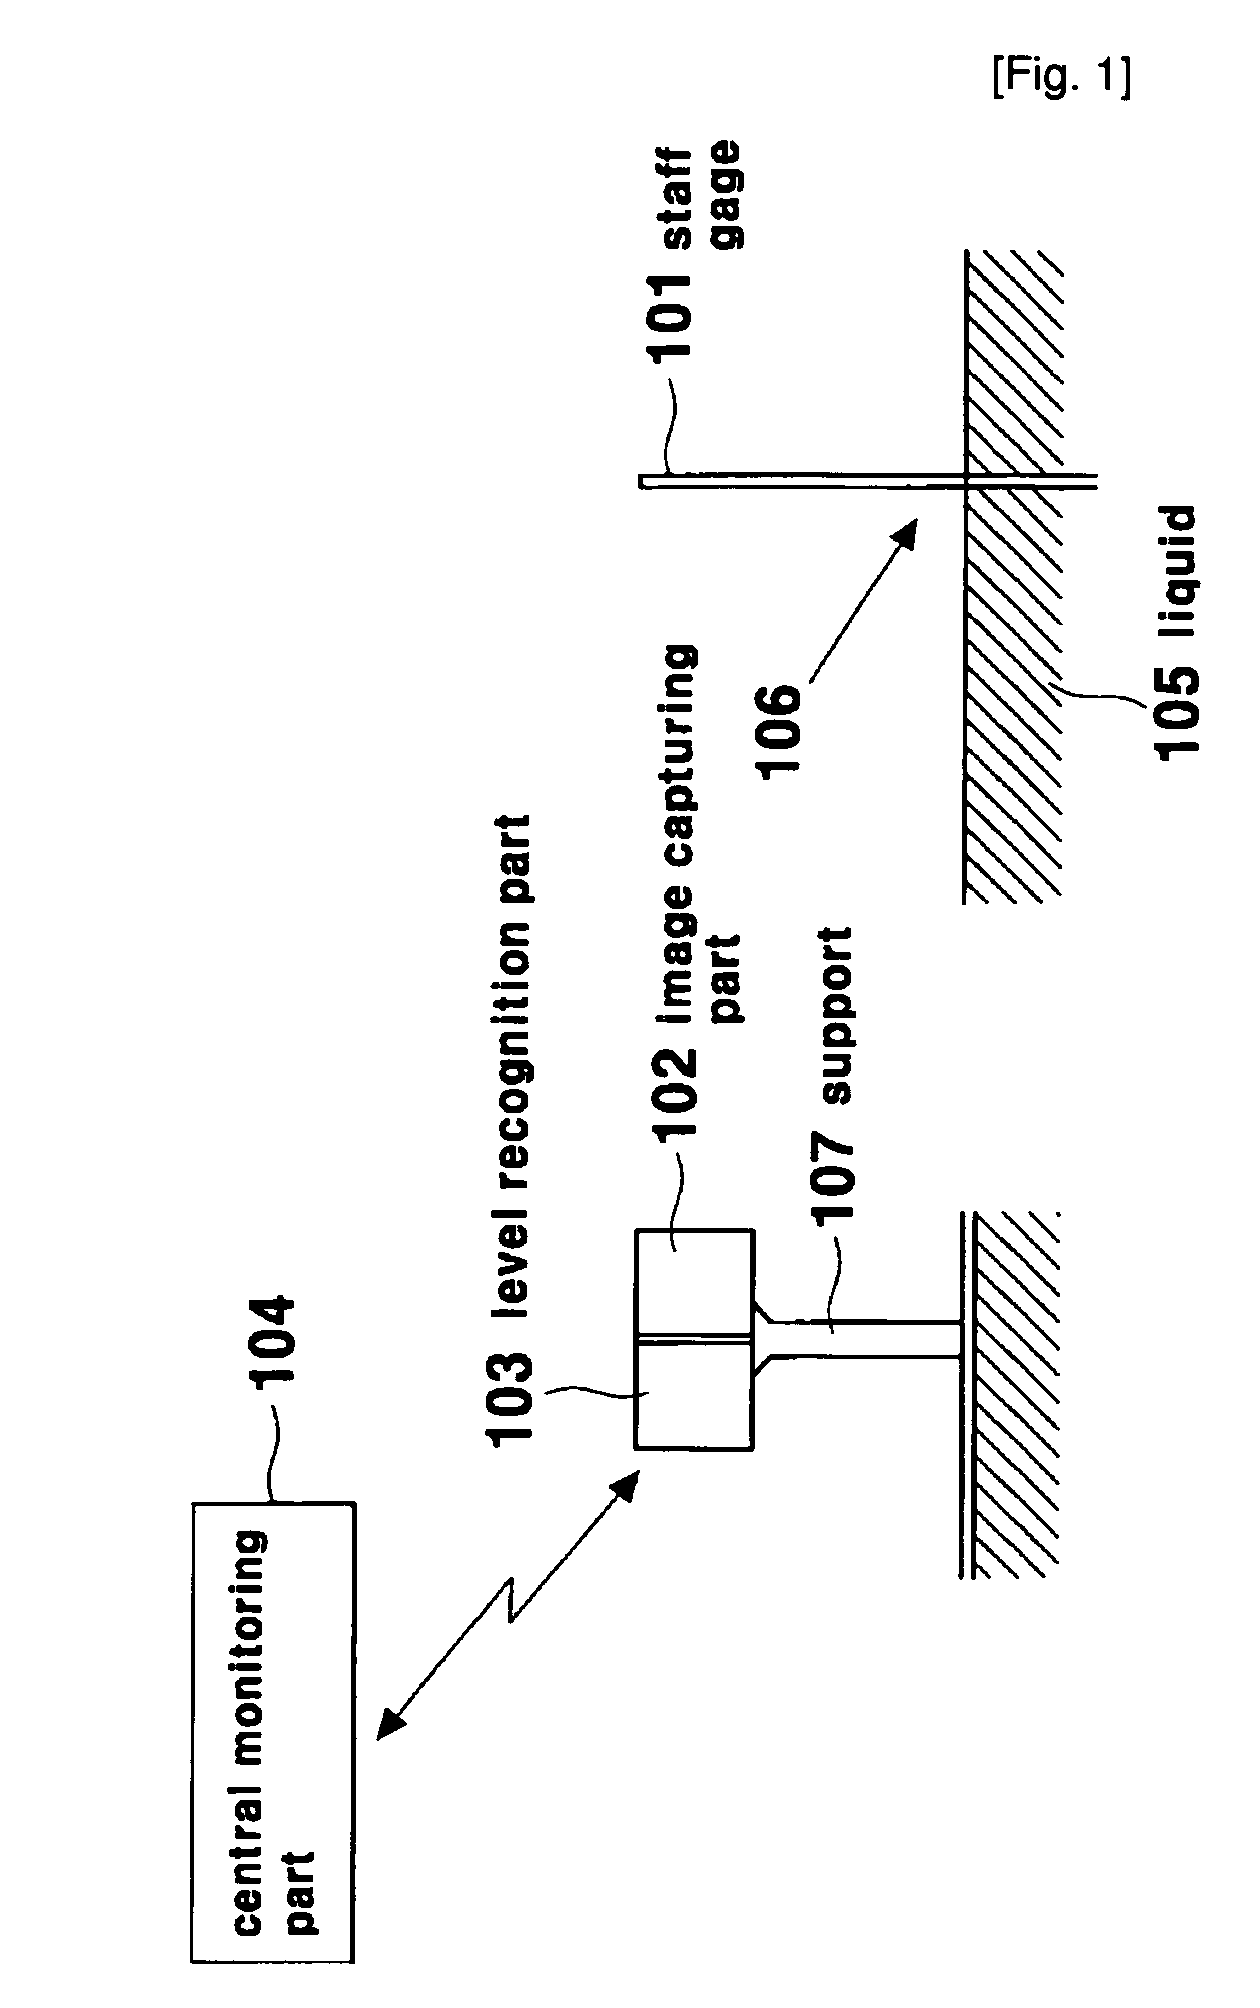 System and method for measuring liquid level by image